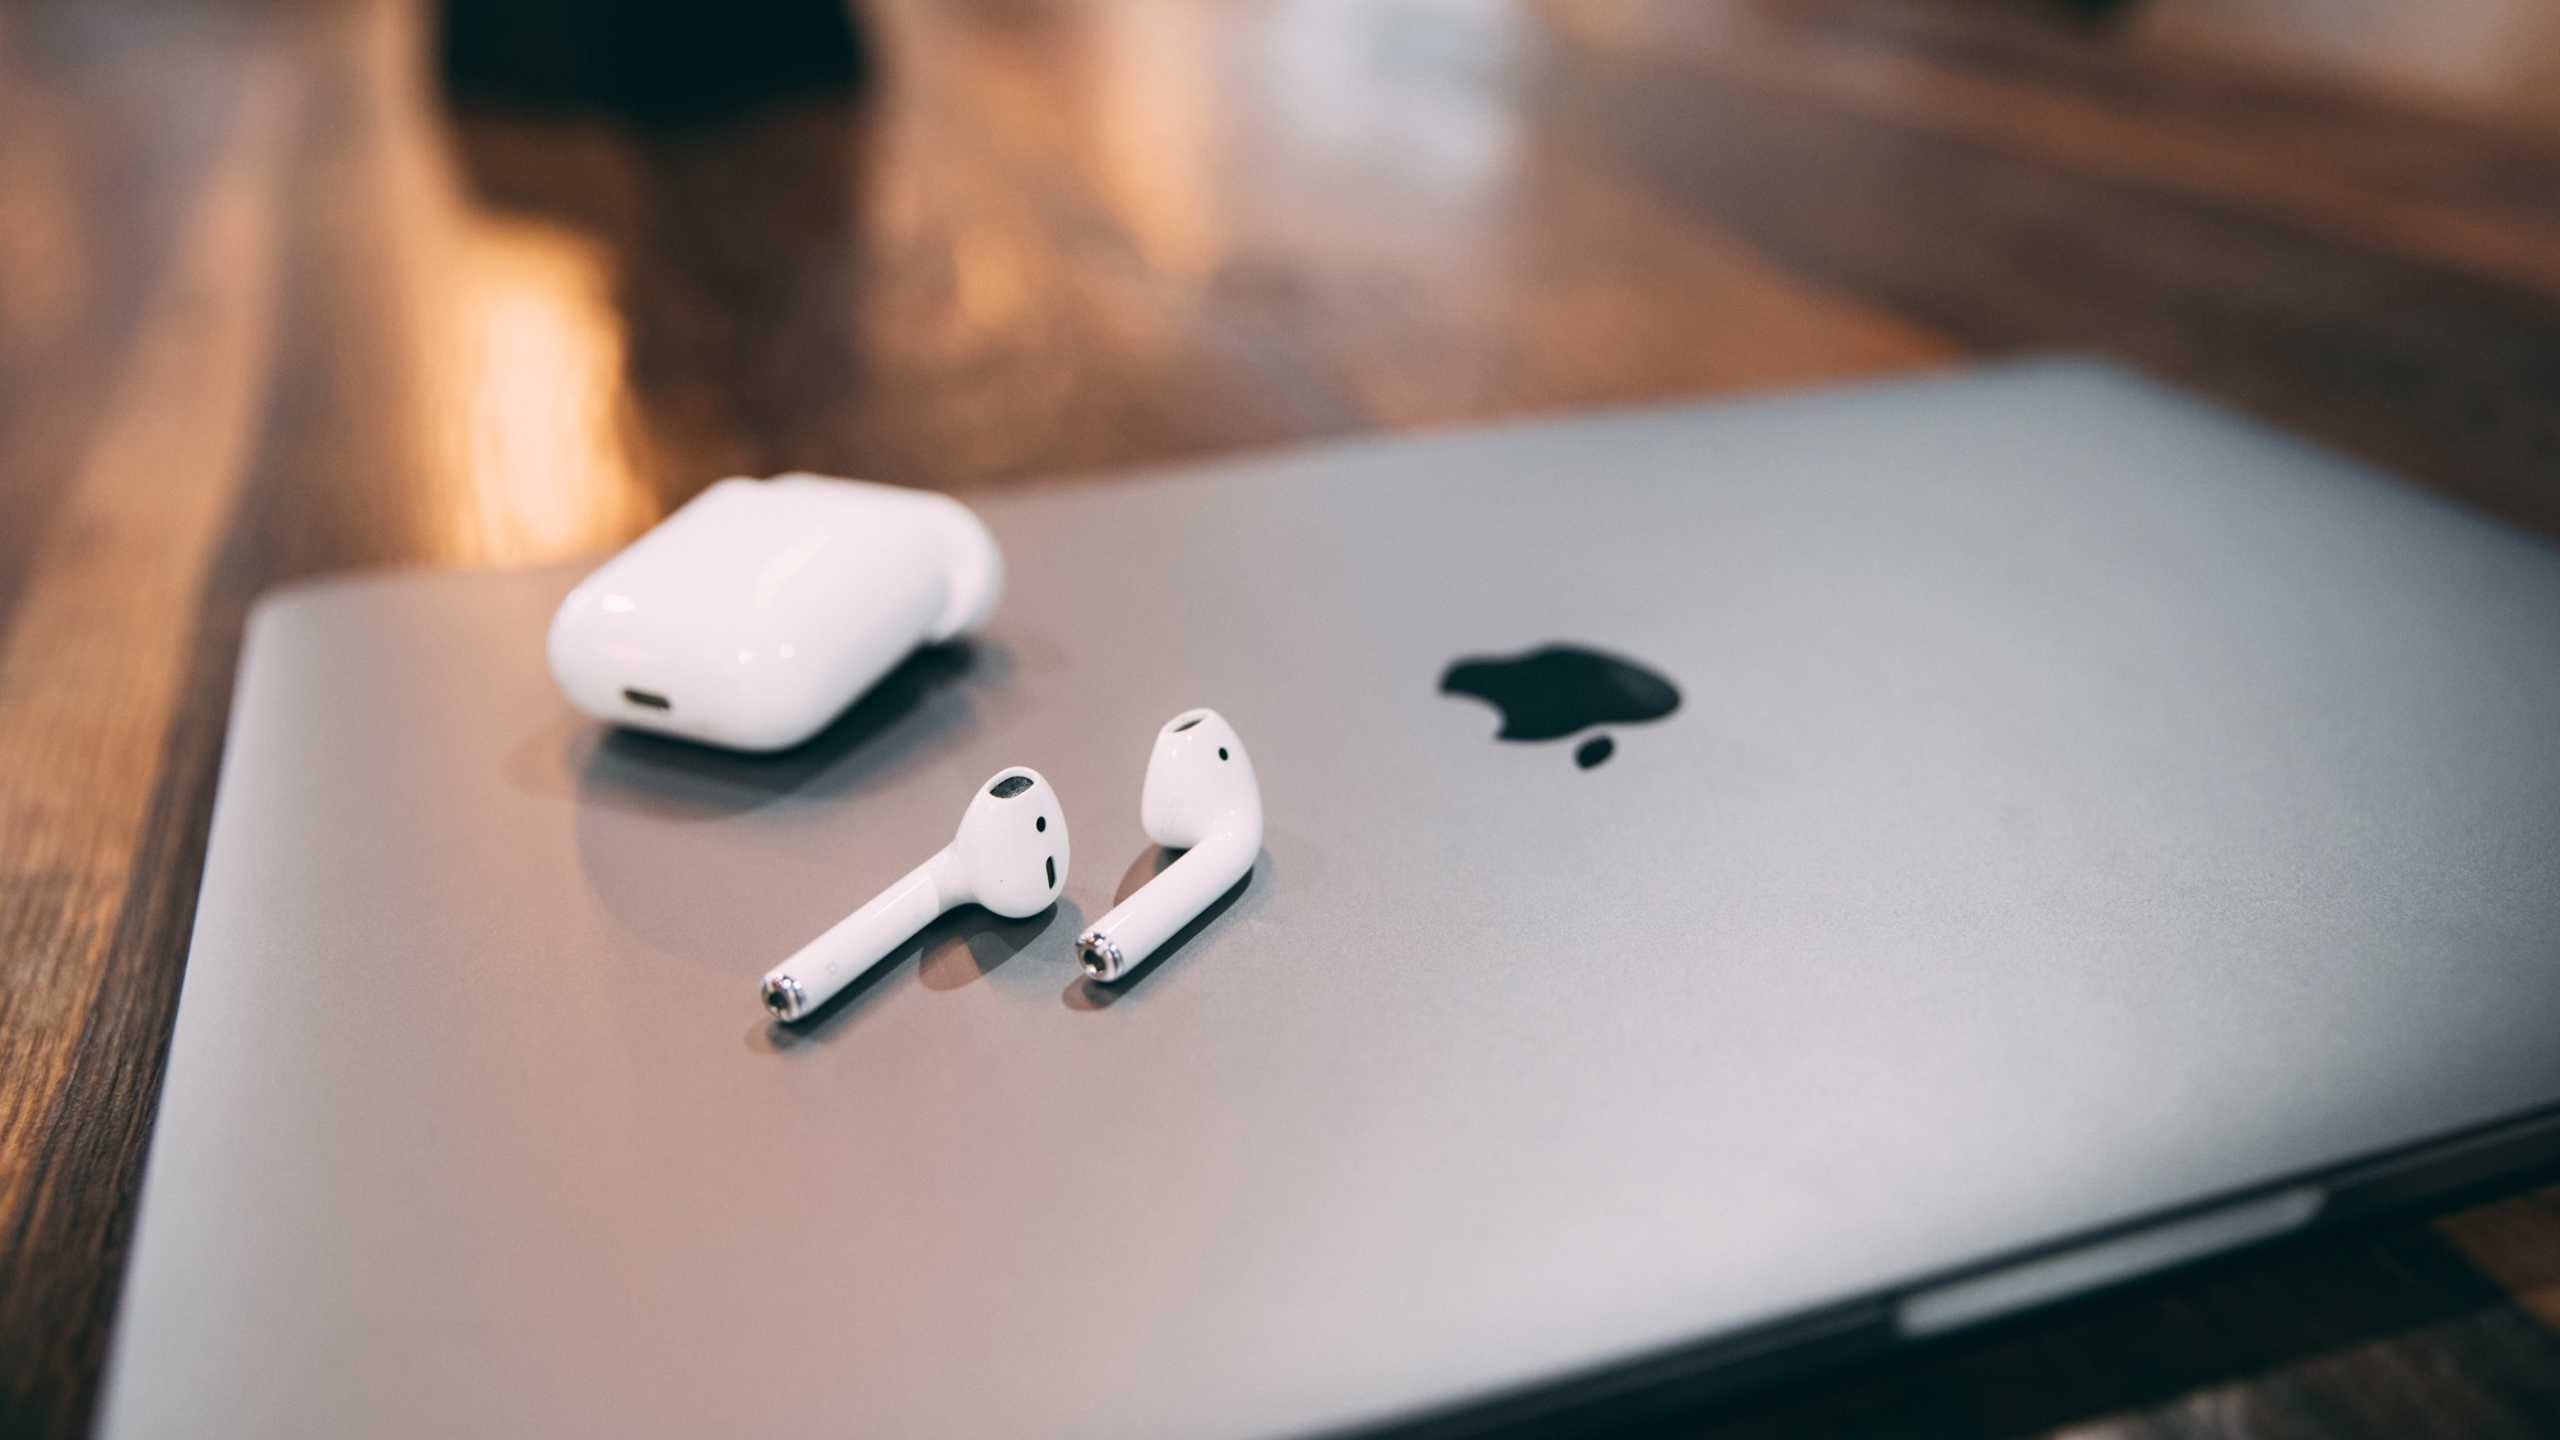 Using Apple AirPods as Gaming Headphones: How Good Are They?